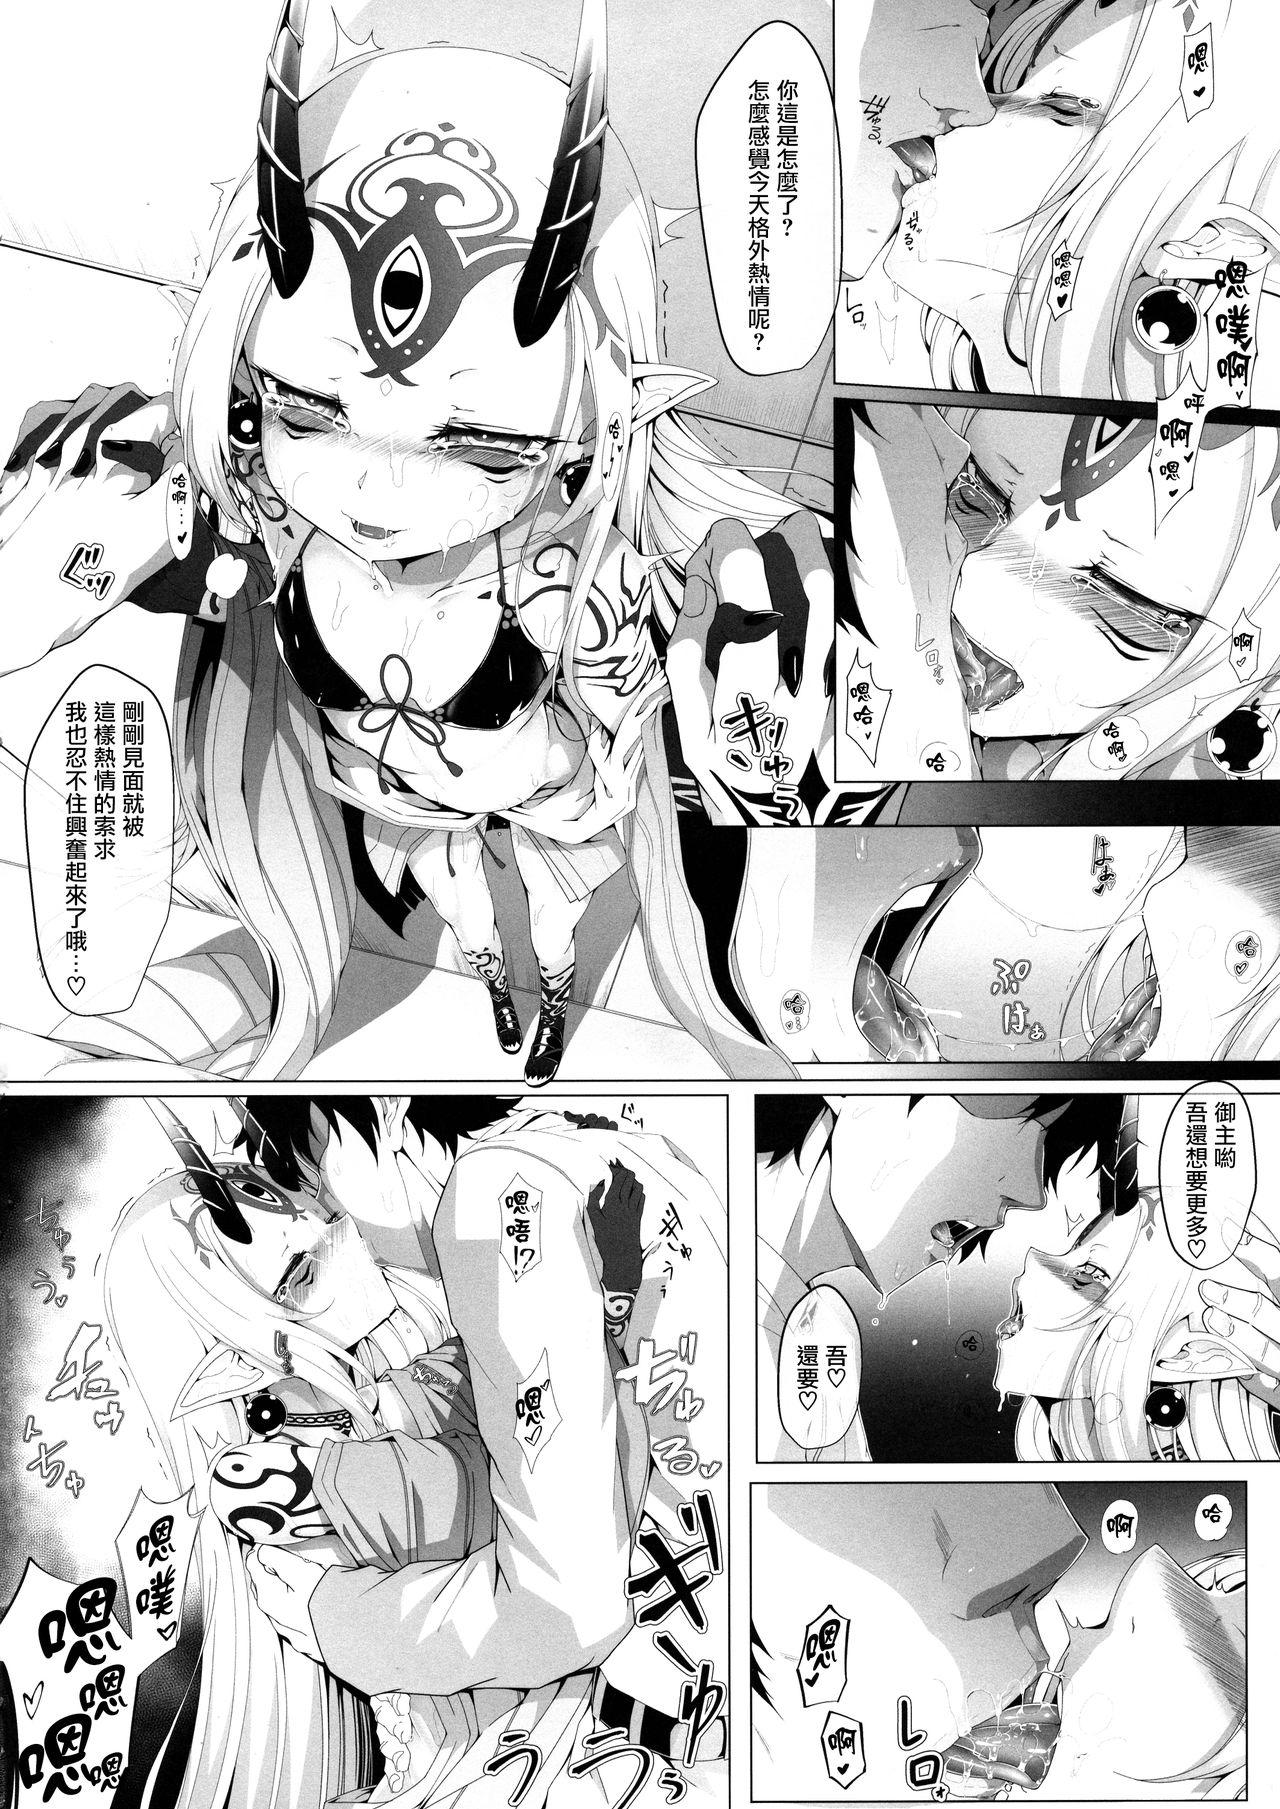 Soft M.P. Vol. 20 - Fate grand order Pounding - Page 4